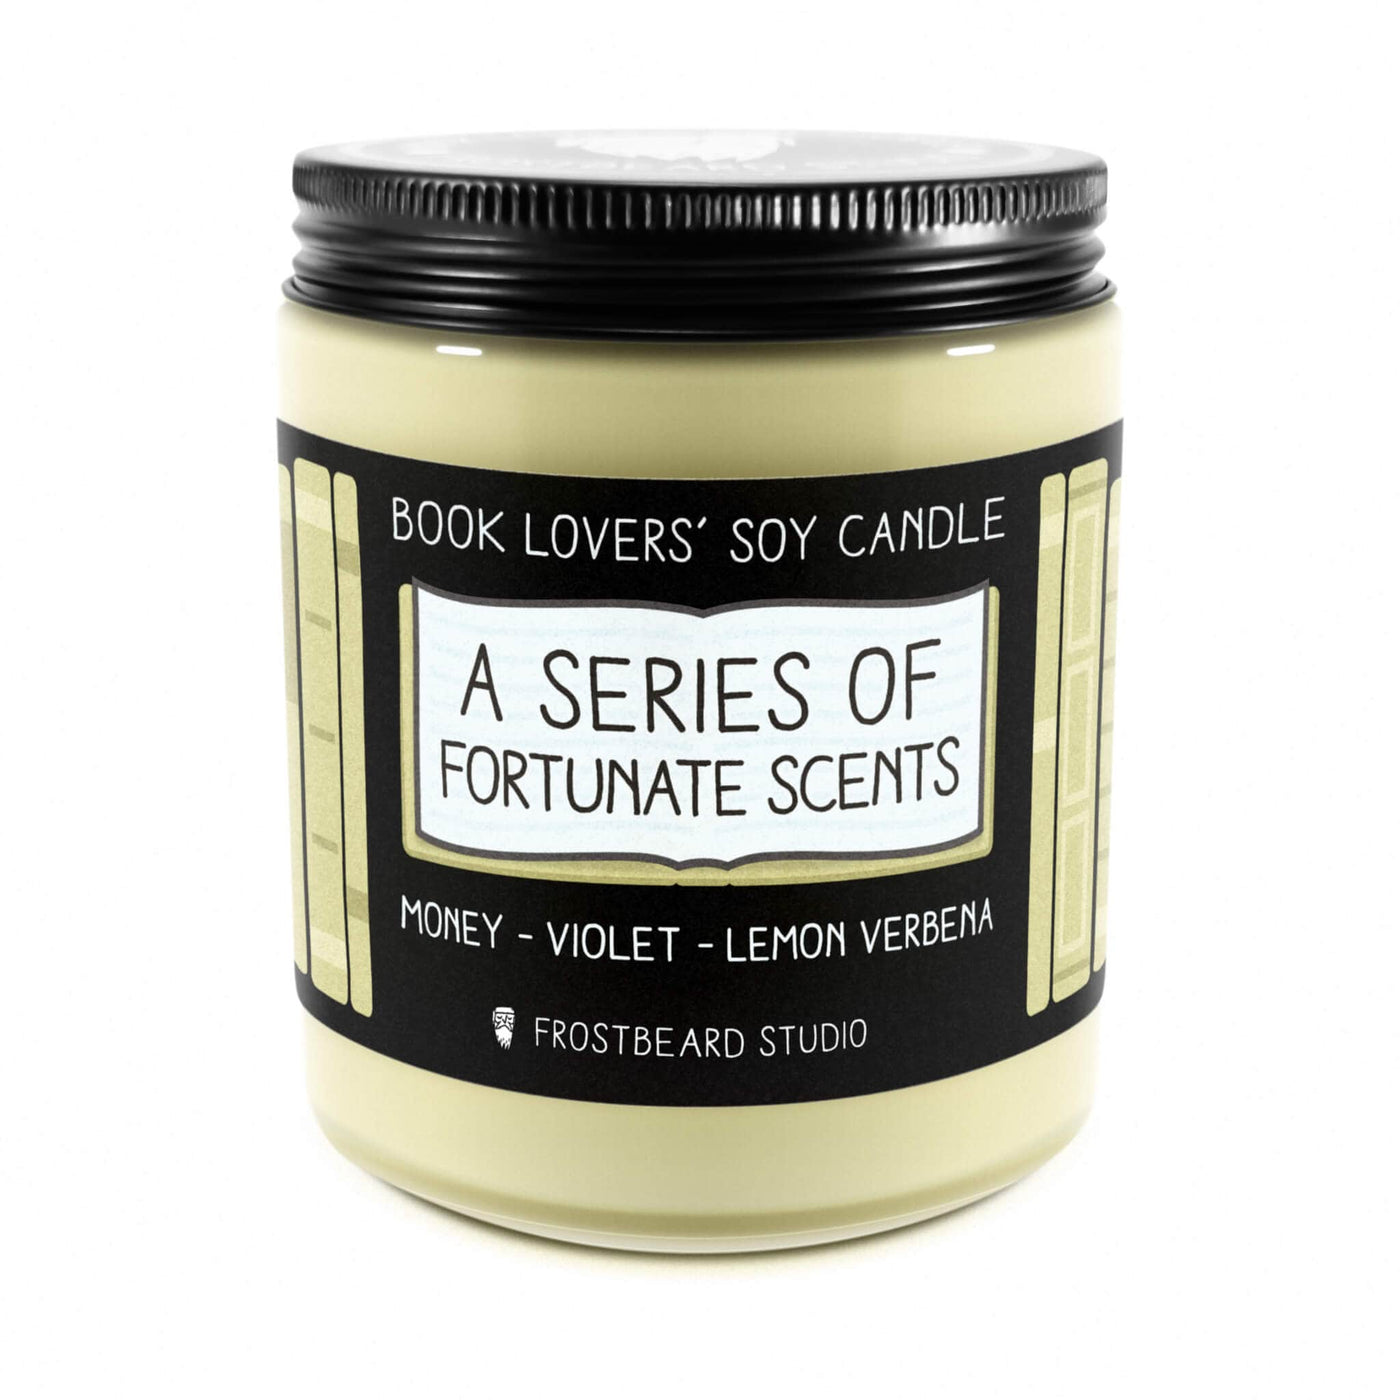 A Series of Fortunate Scents  -  8 oz Jar  -  Book Lovers' Soy Candle  -  Frostbeard Studio